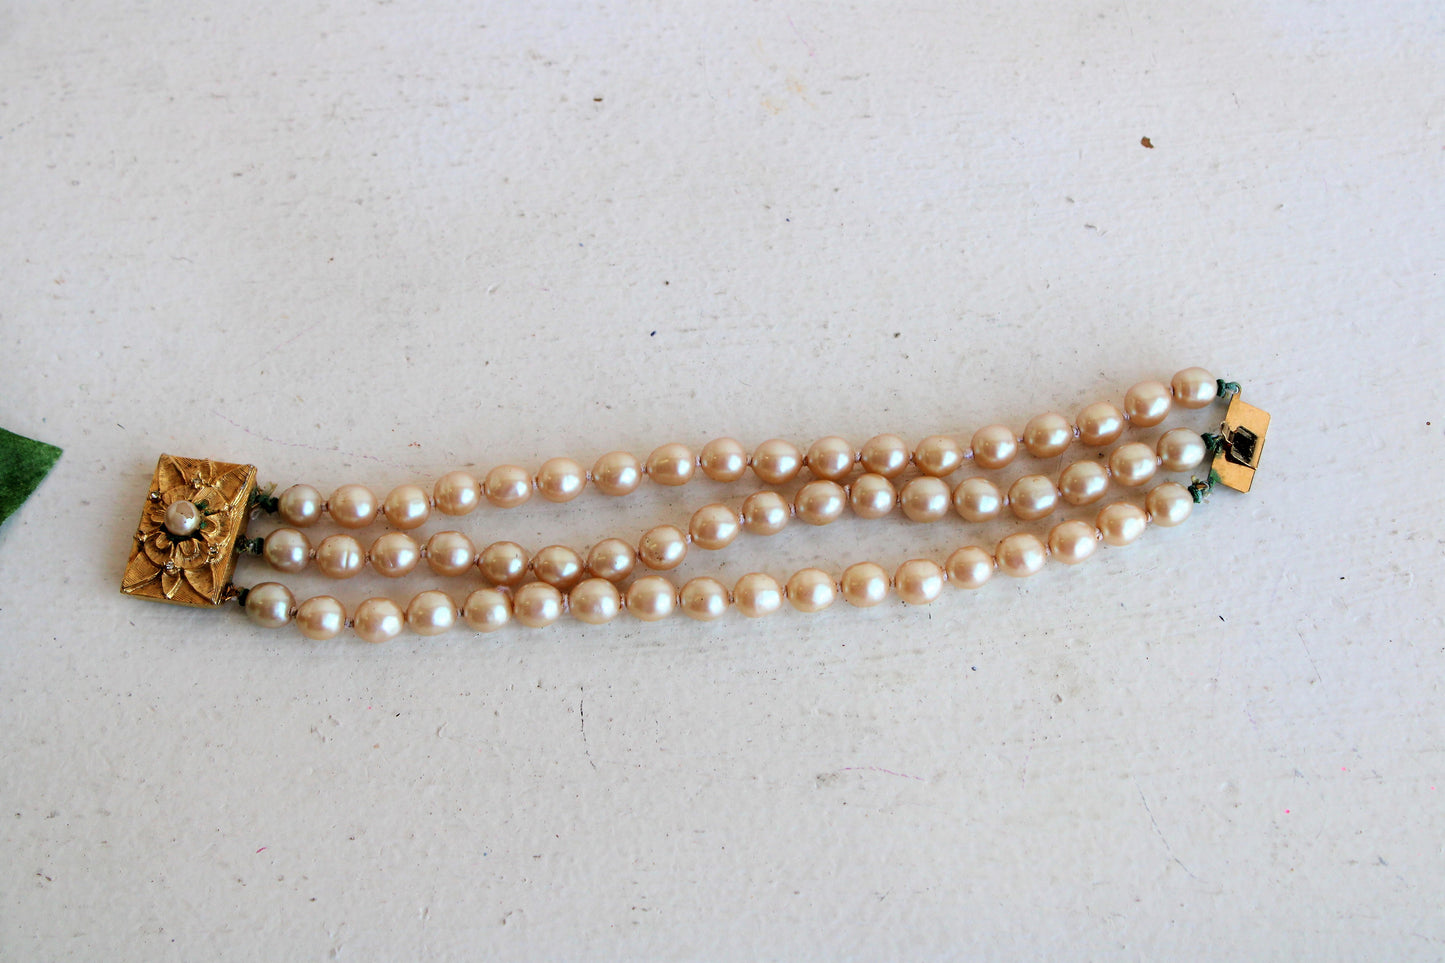 Vintage Mid Century Faux Pearl Bracelet with Ornate Clasp